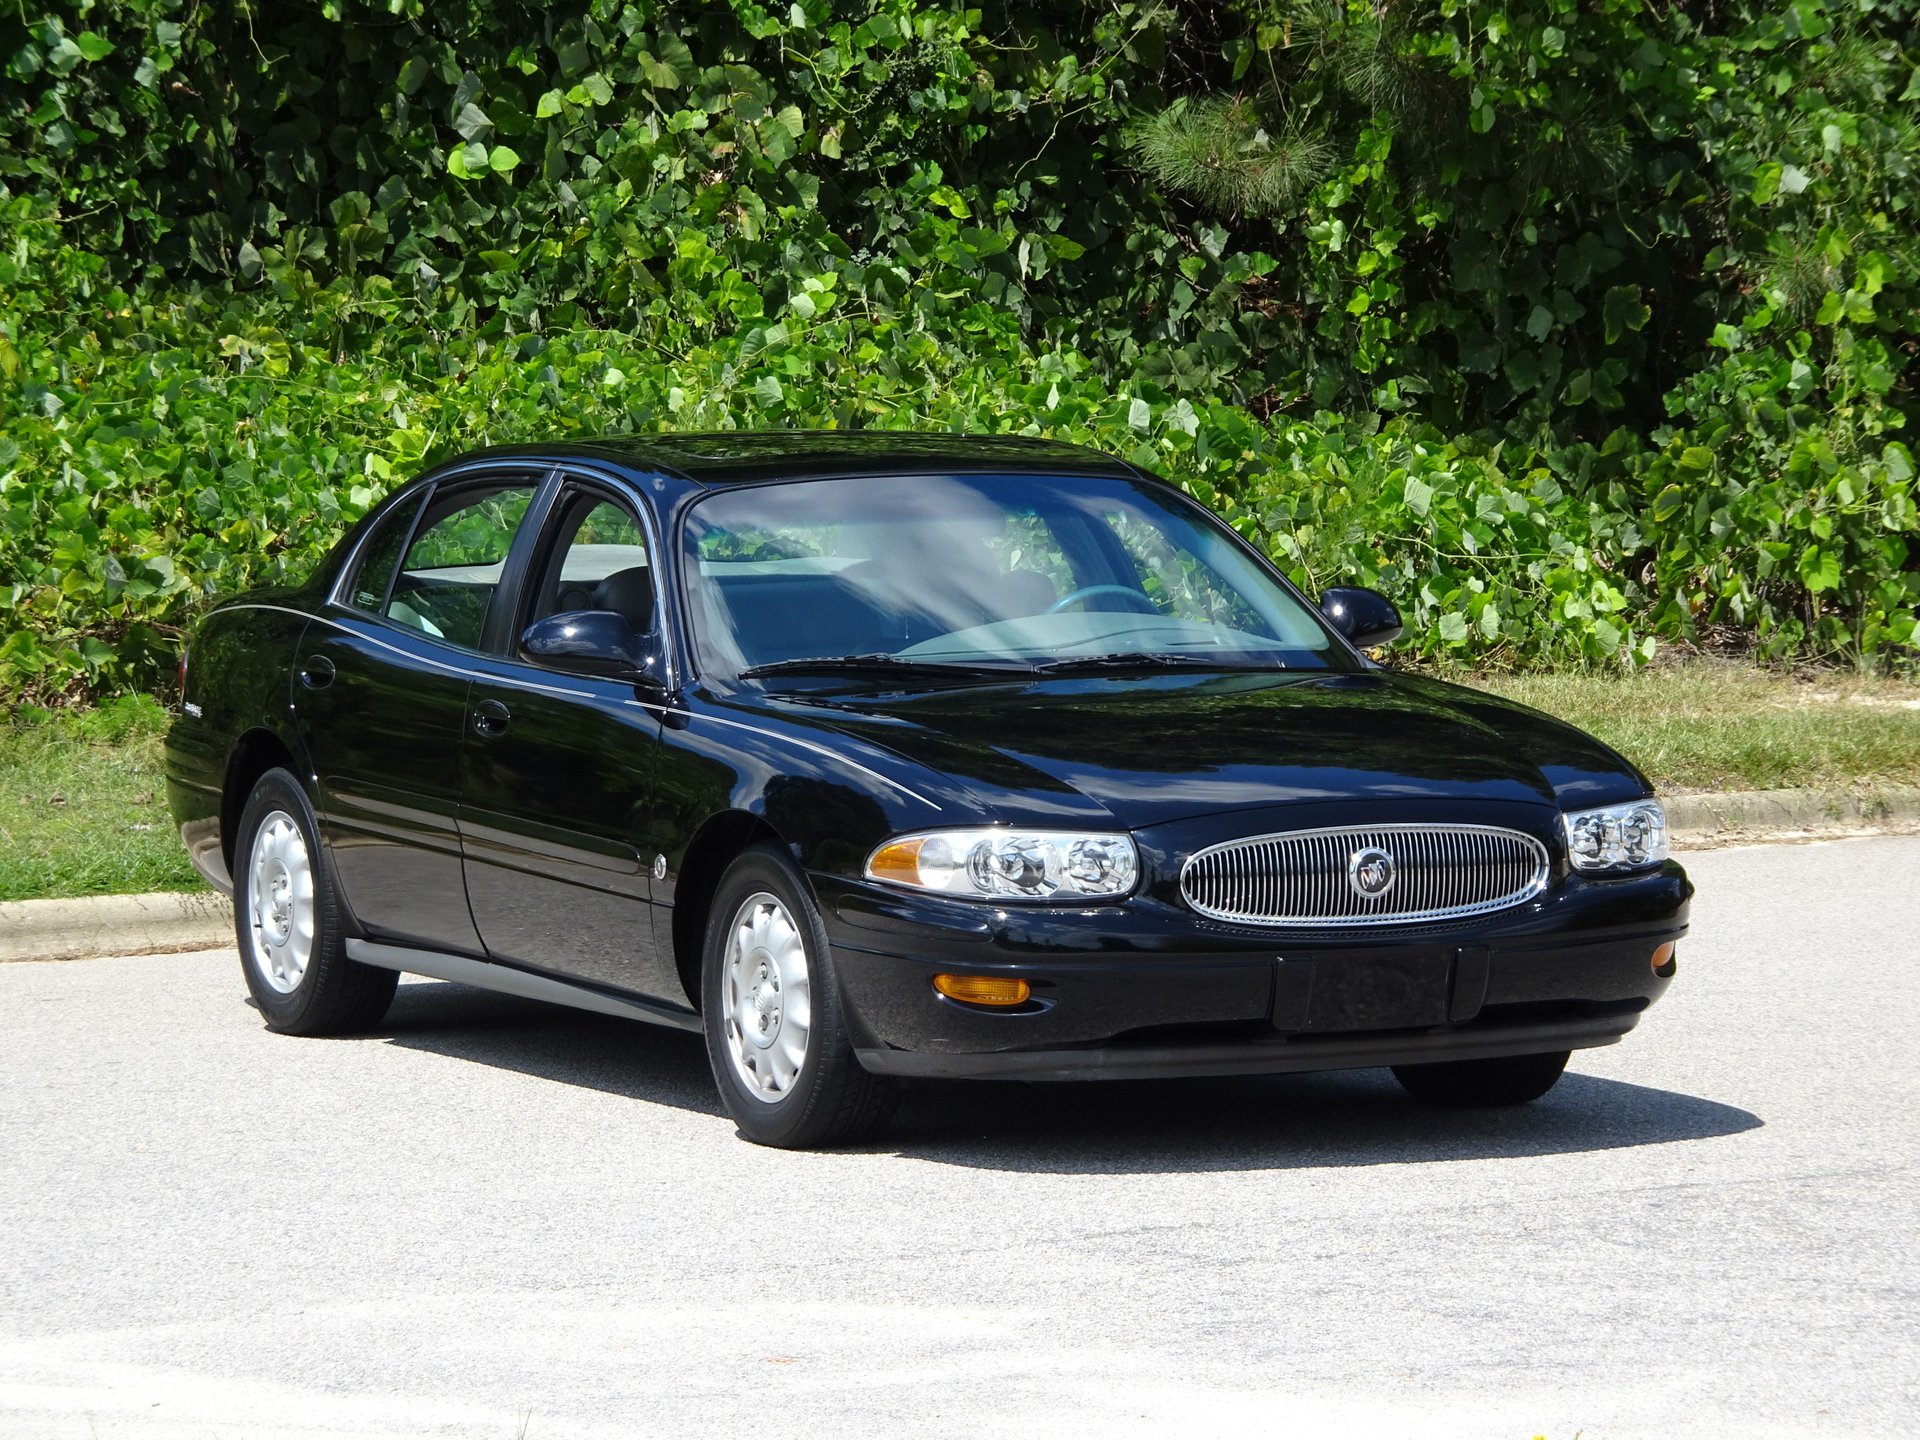 2000 Buick LeSabre | Raleigh Classic Car Auctions